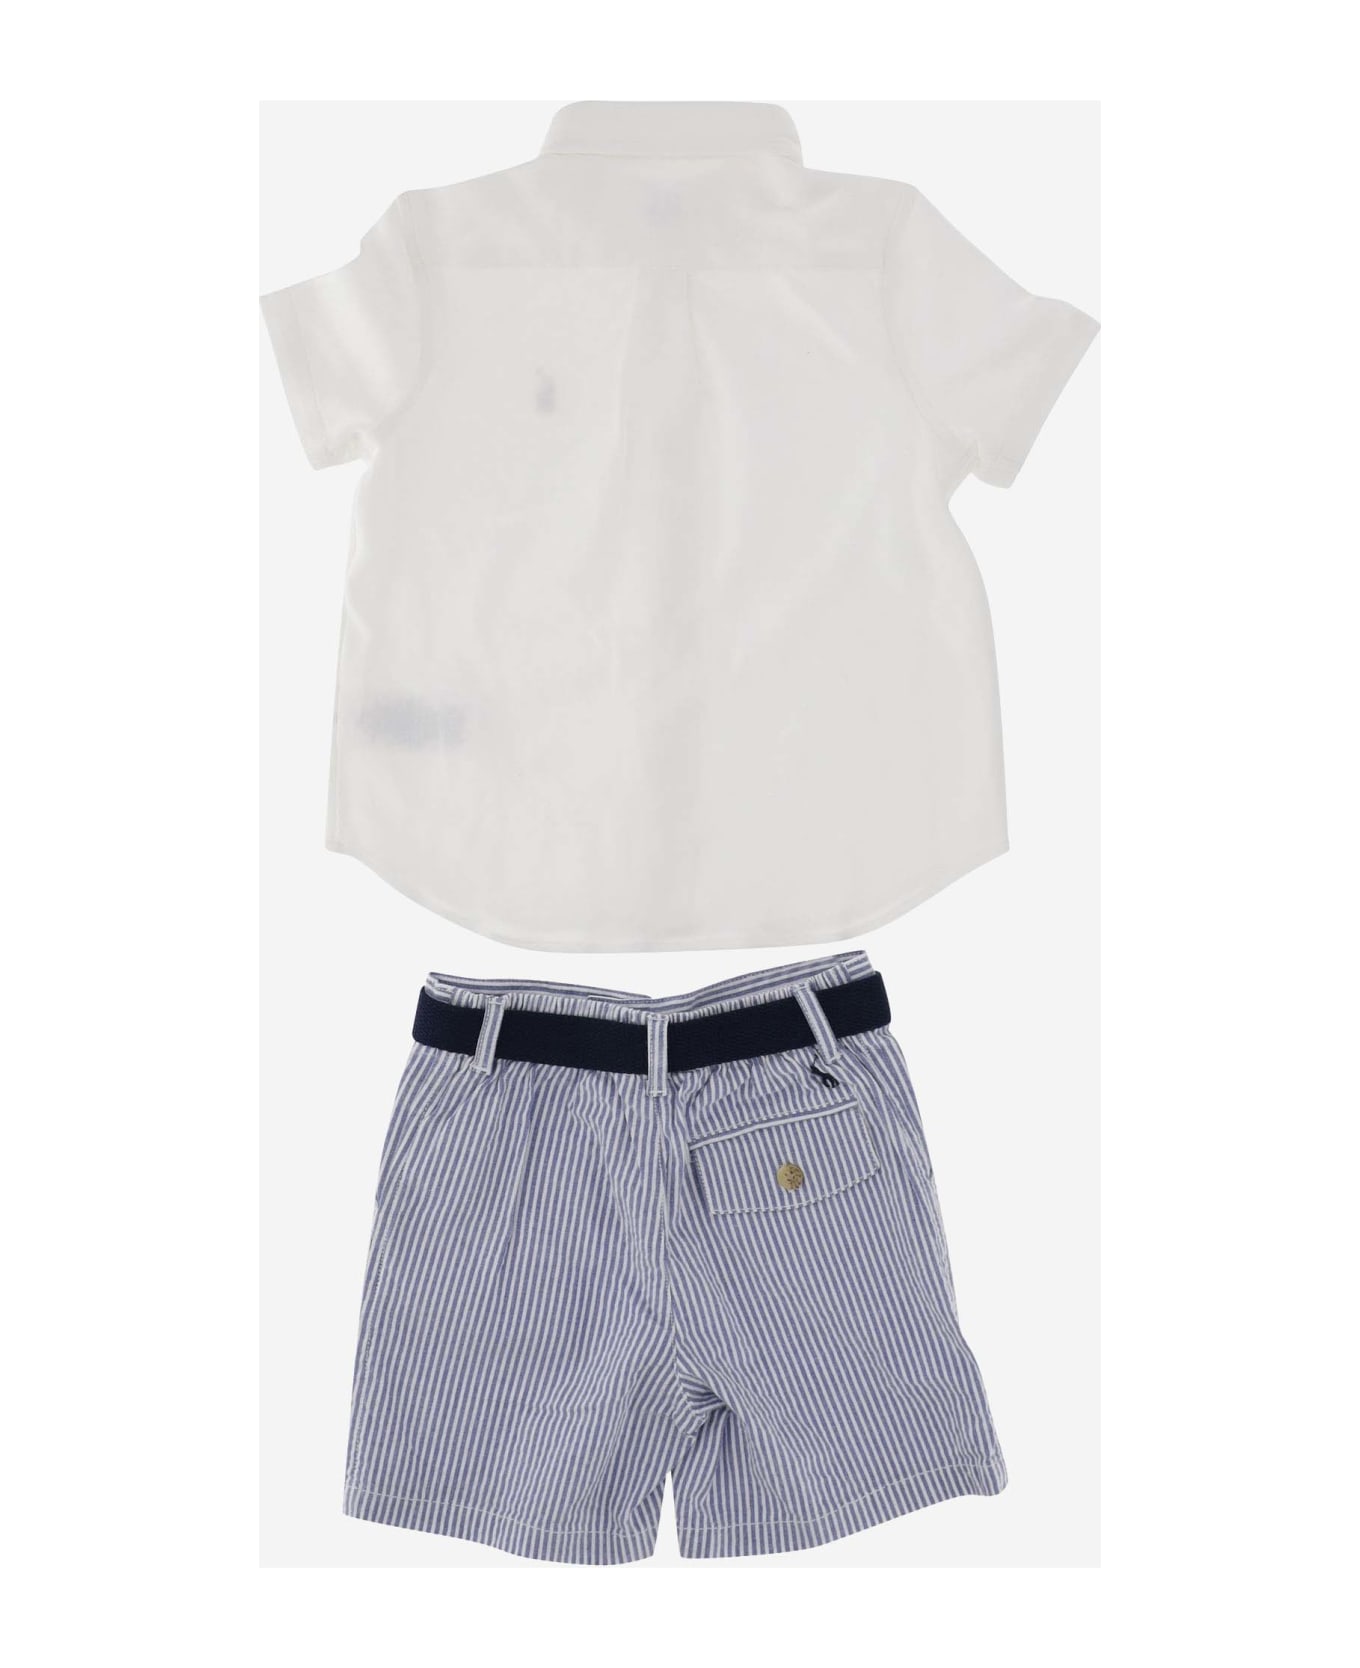 Ralph Lauren Two-piece Outfit Set - White